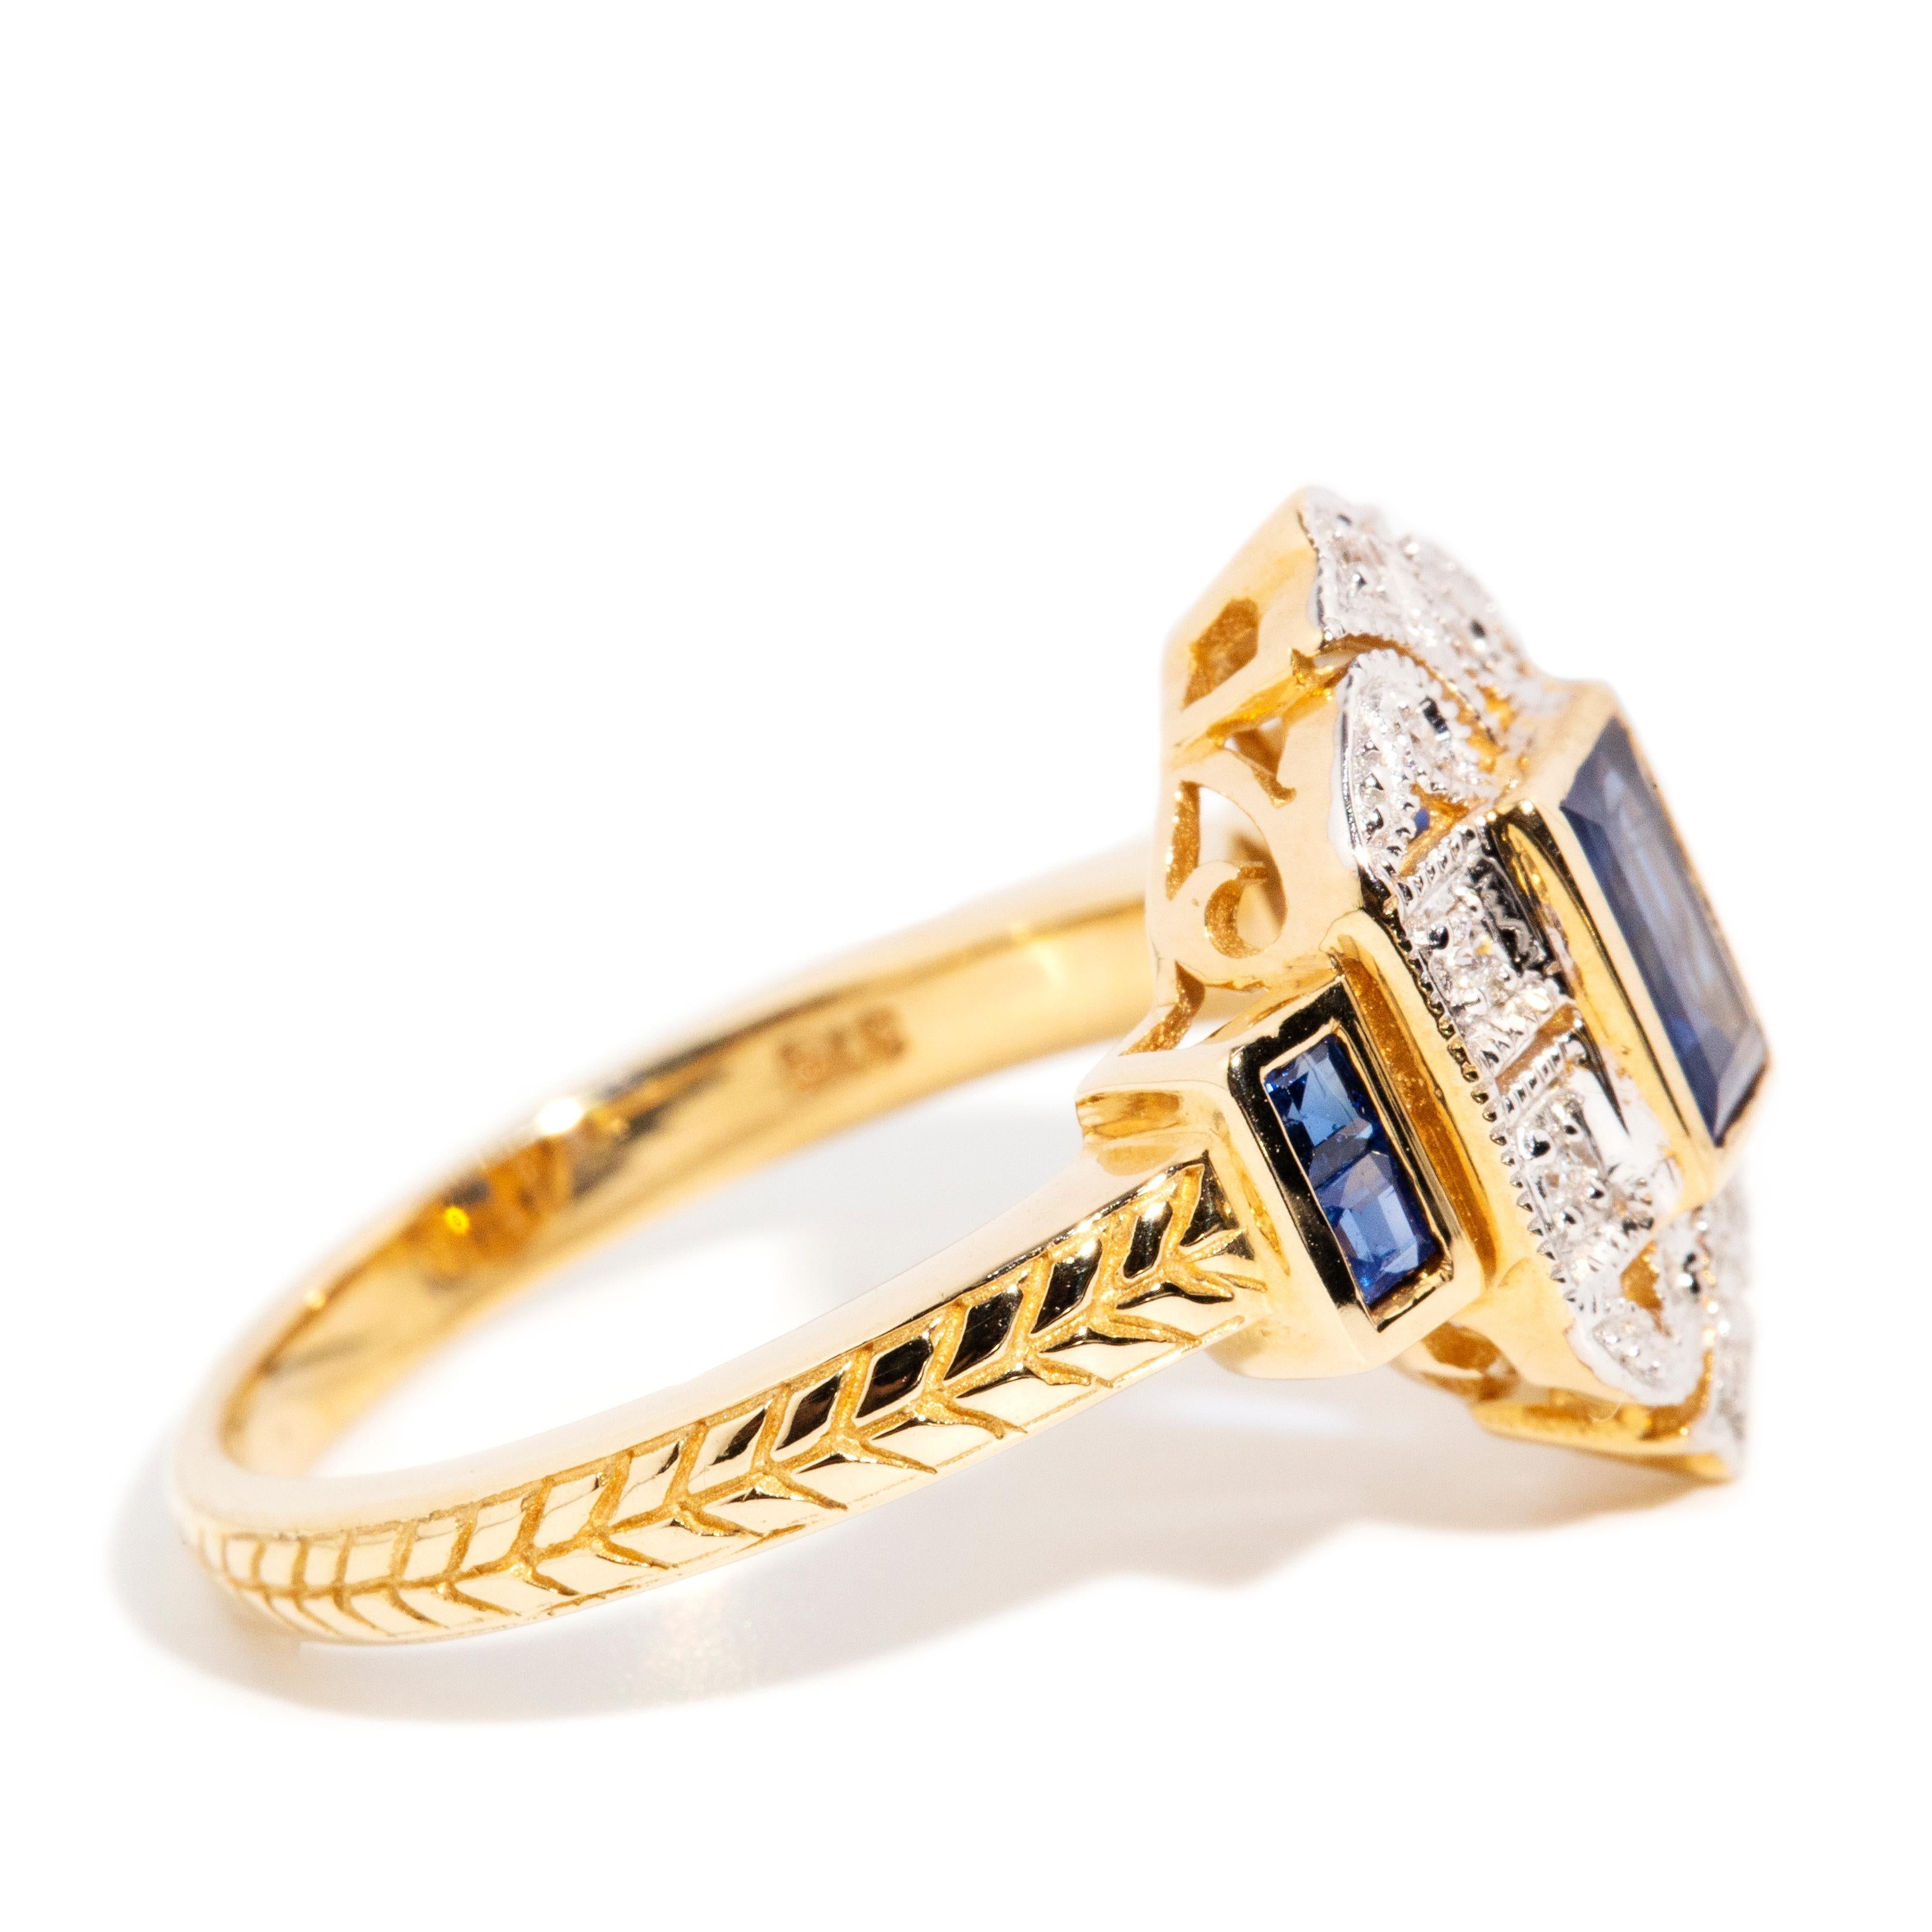 Women's Vintage Inspired Deep Blue Baguette Sapphire & Diamond Ring 9 Carat Yellow Gold For Sale